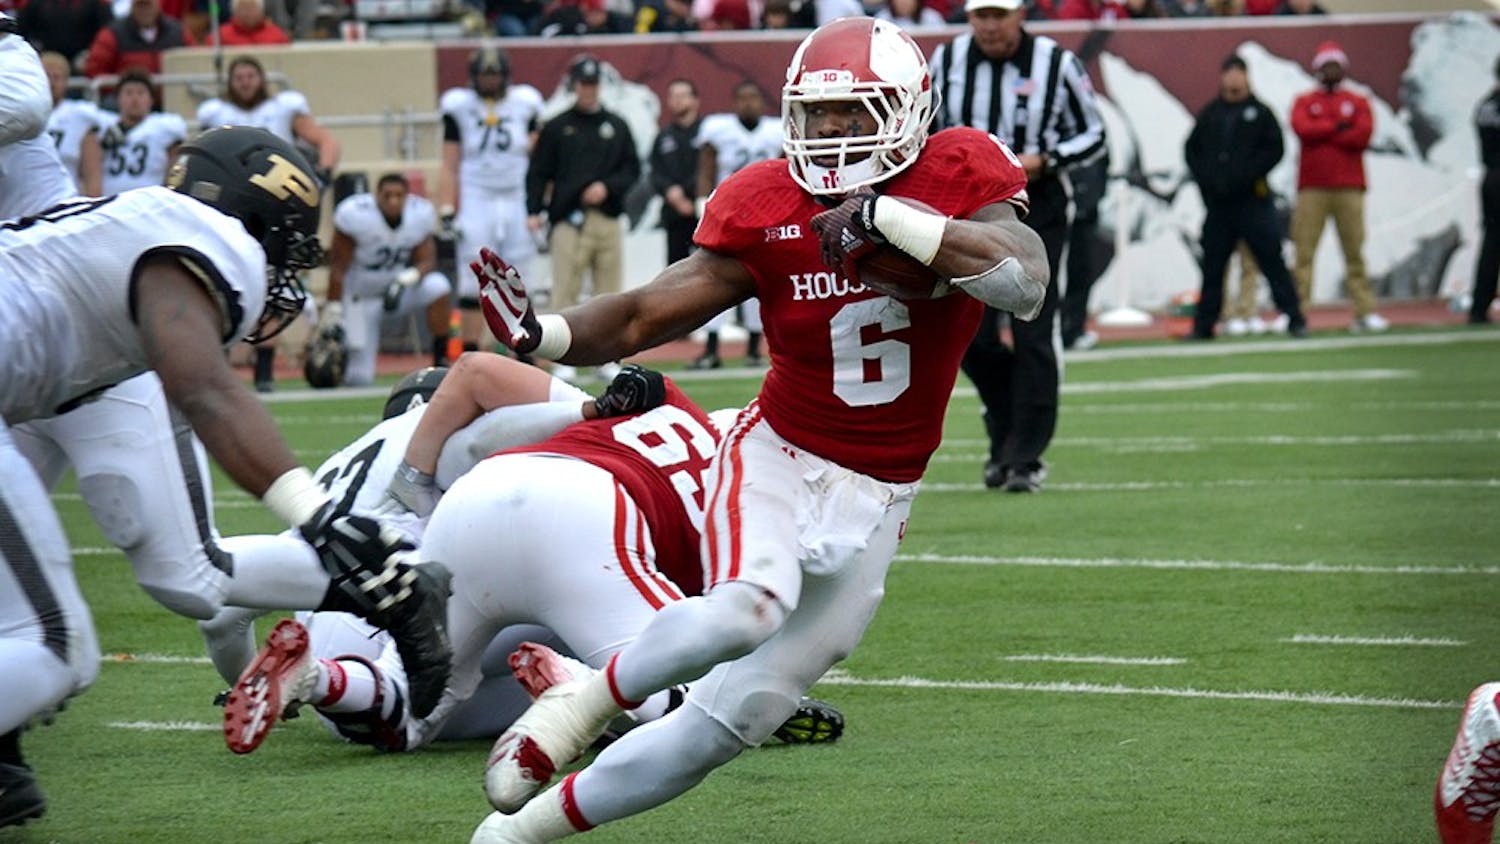 Junior running back Tevin Coleman runs the ball during IU's game against Purdue on Saturday at Memorial Stadium. Coleman surpassed 2,000 yards rushing on the season during the Hoosiers' final game of the year.